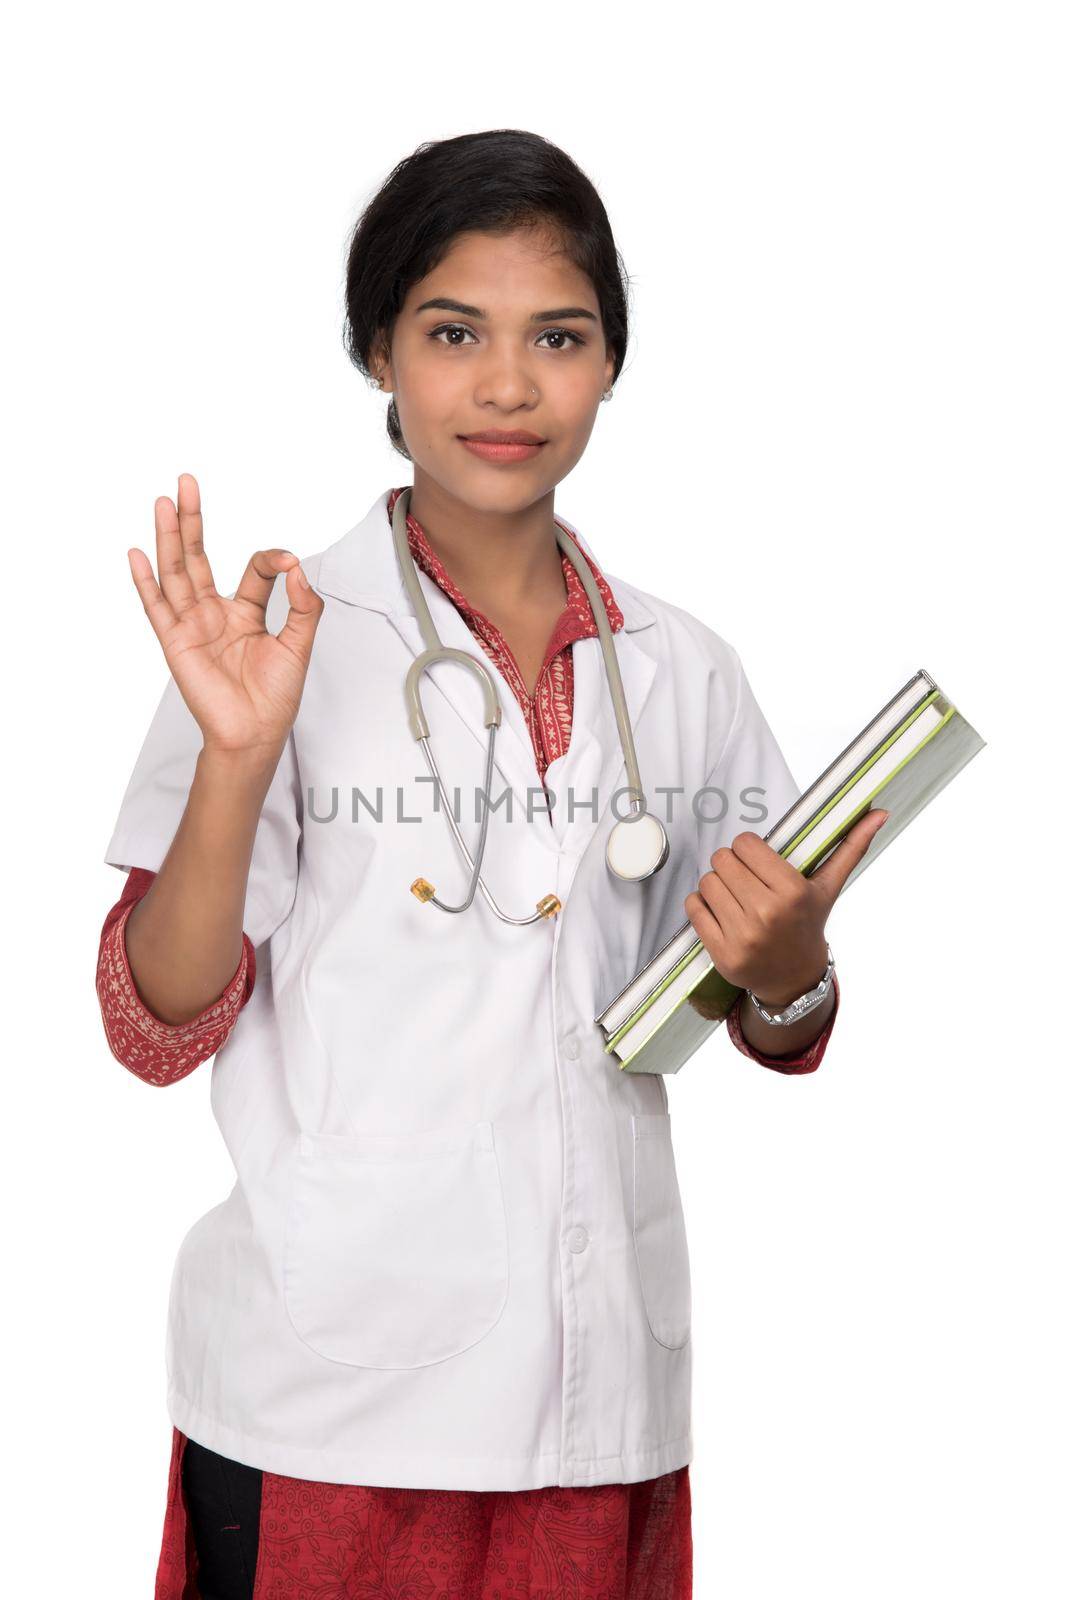 Young woman doctor holding book with stethoscope by DipakShelare